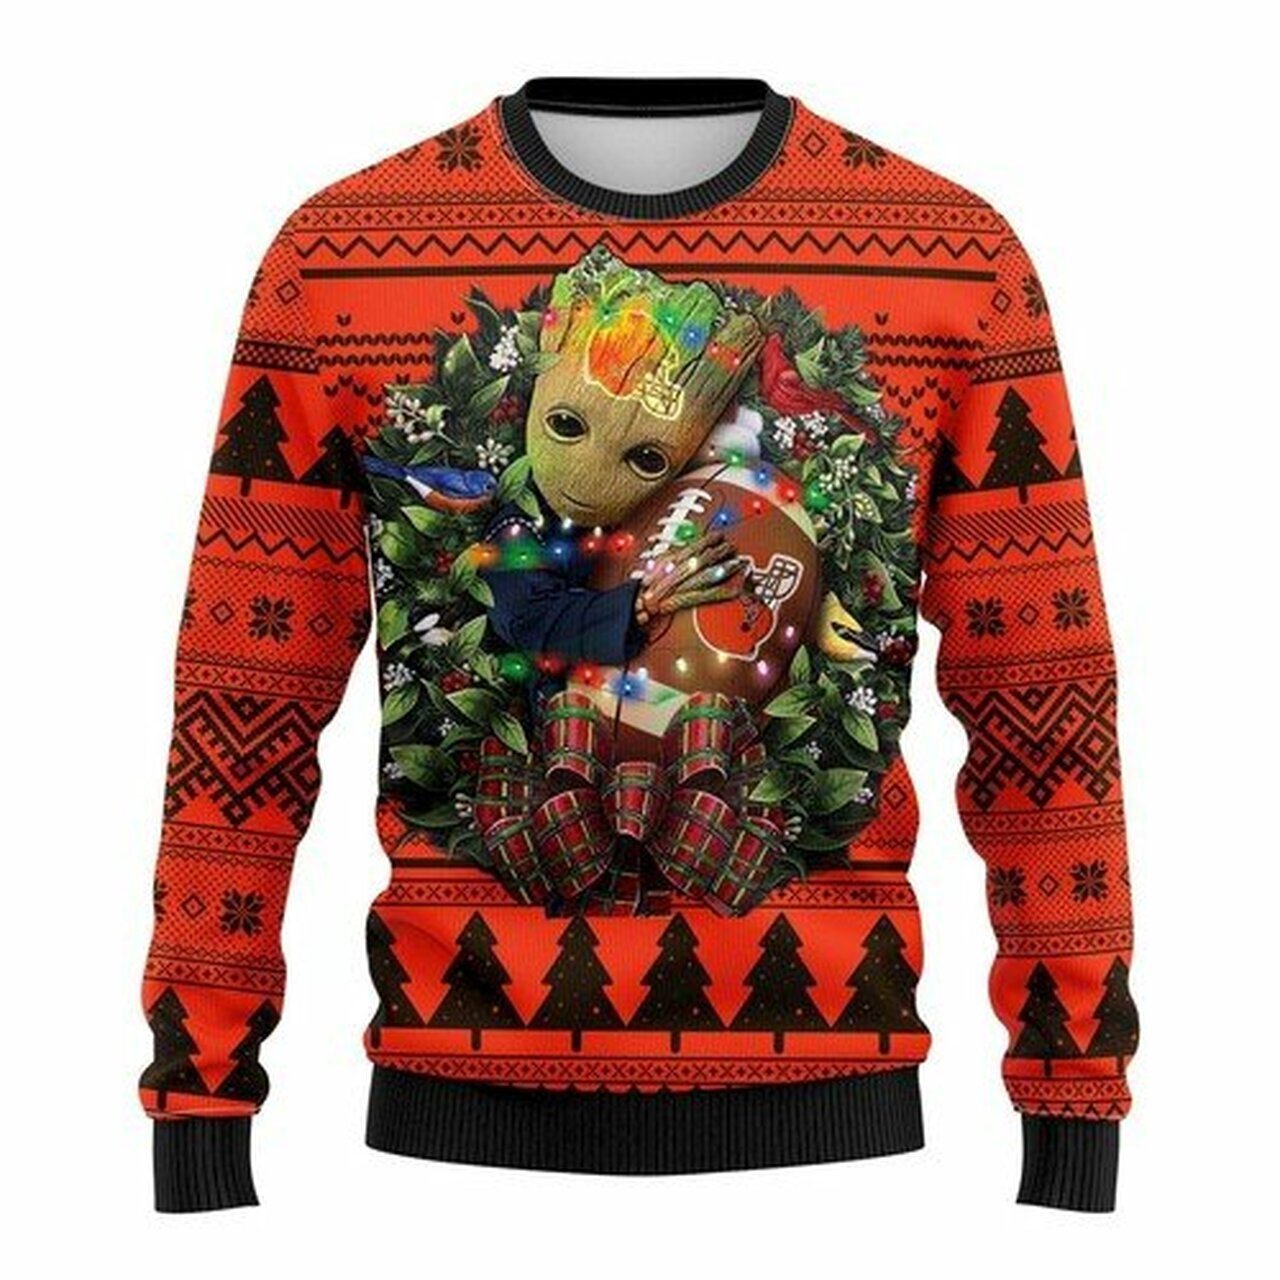 NFL Cleveland Browns Groot hug ugly christmas sweater